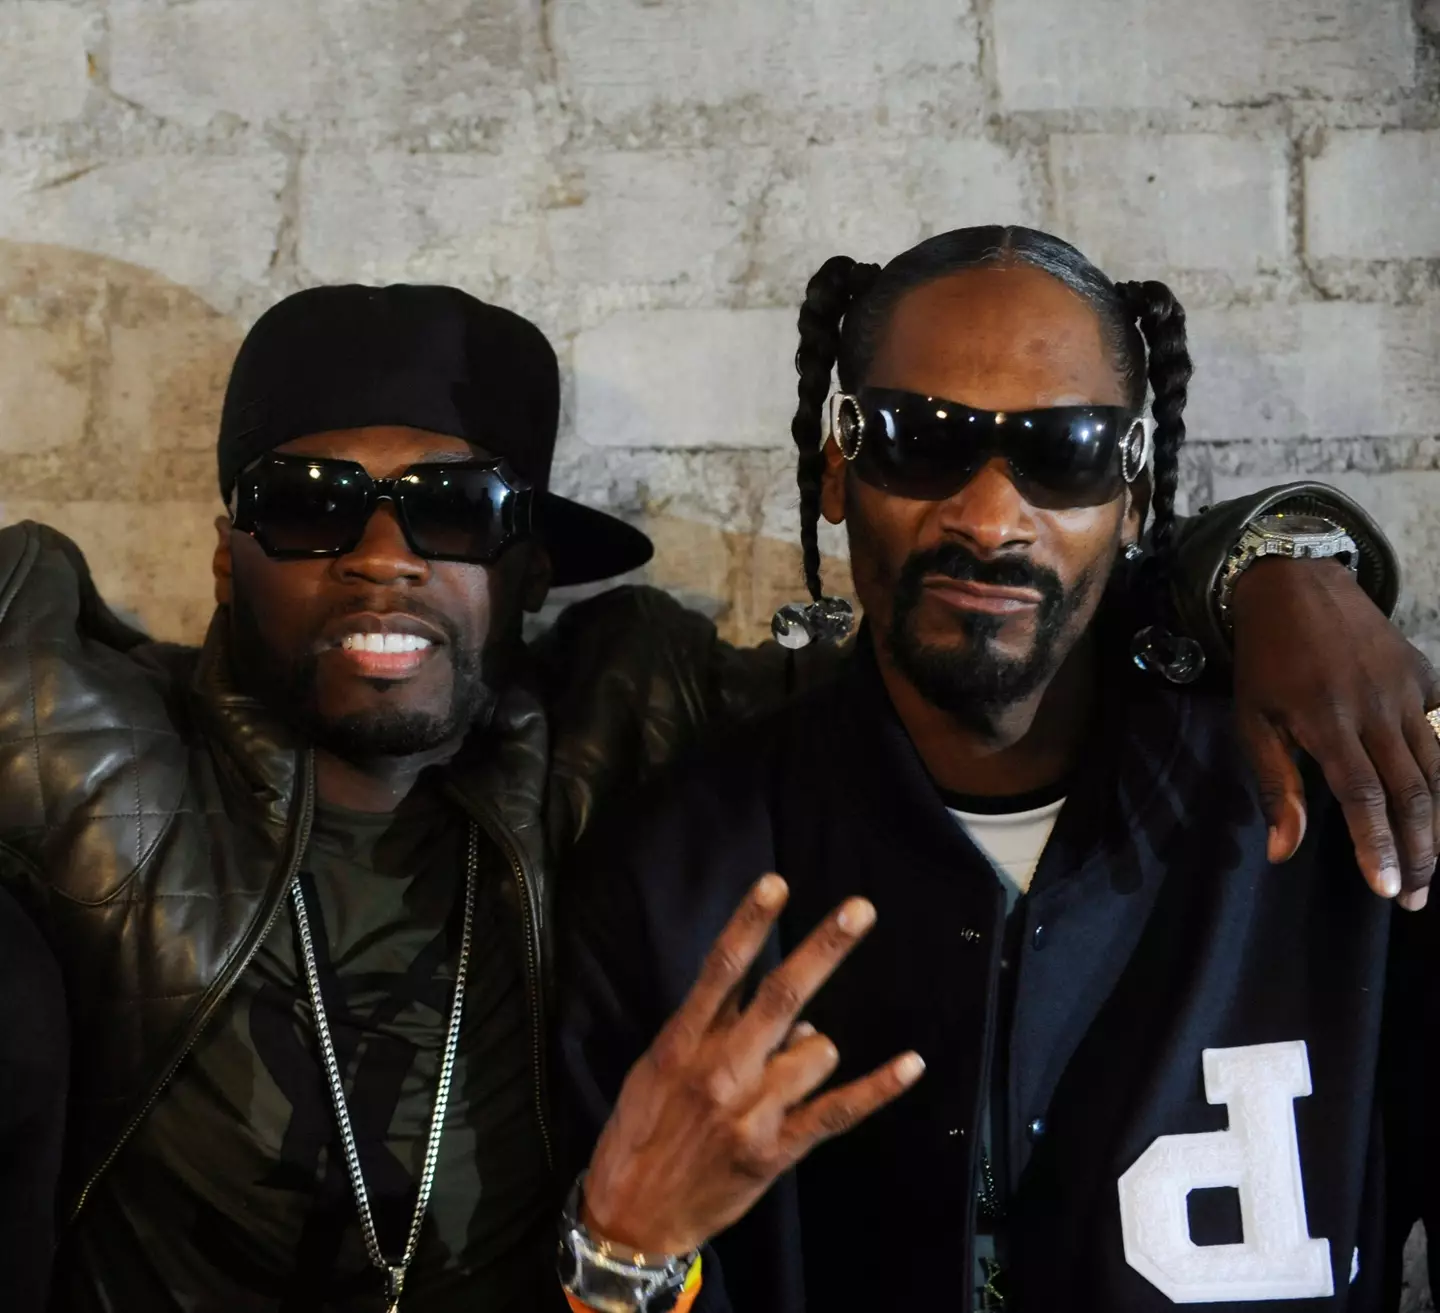 50 Cent says there is one person who can smoke more weed than Snoop Dogg.